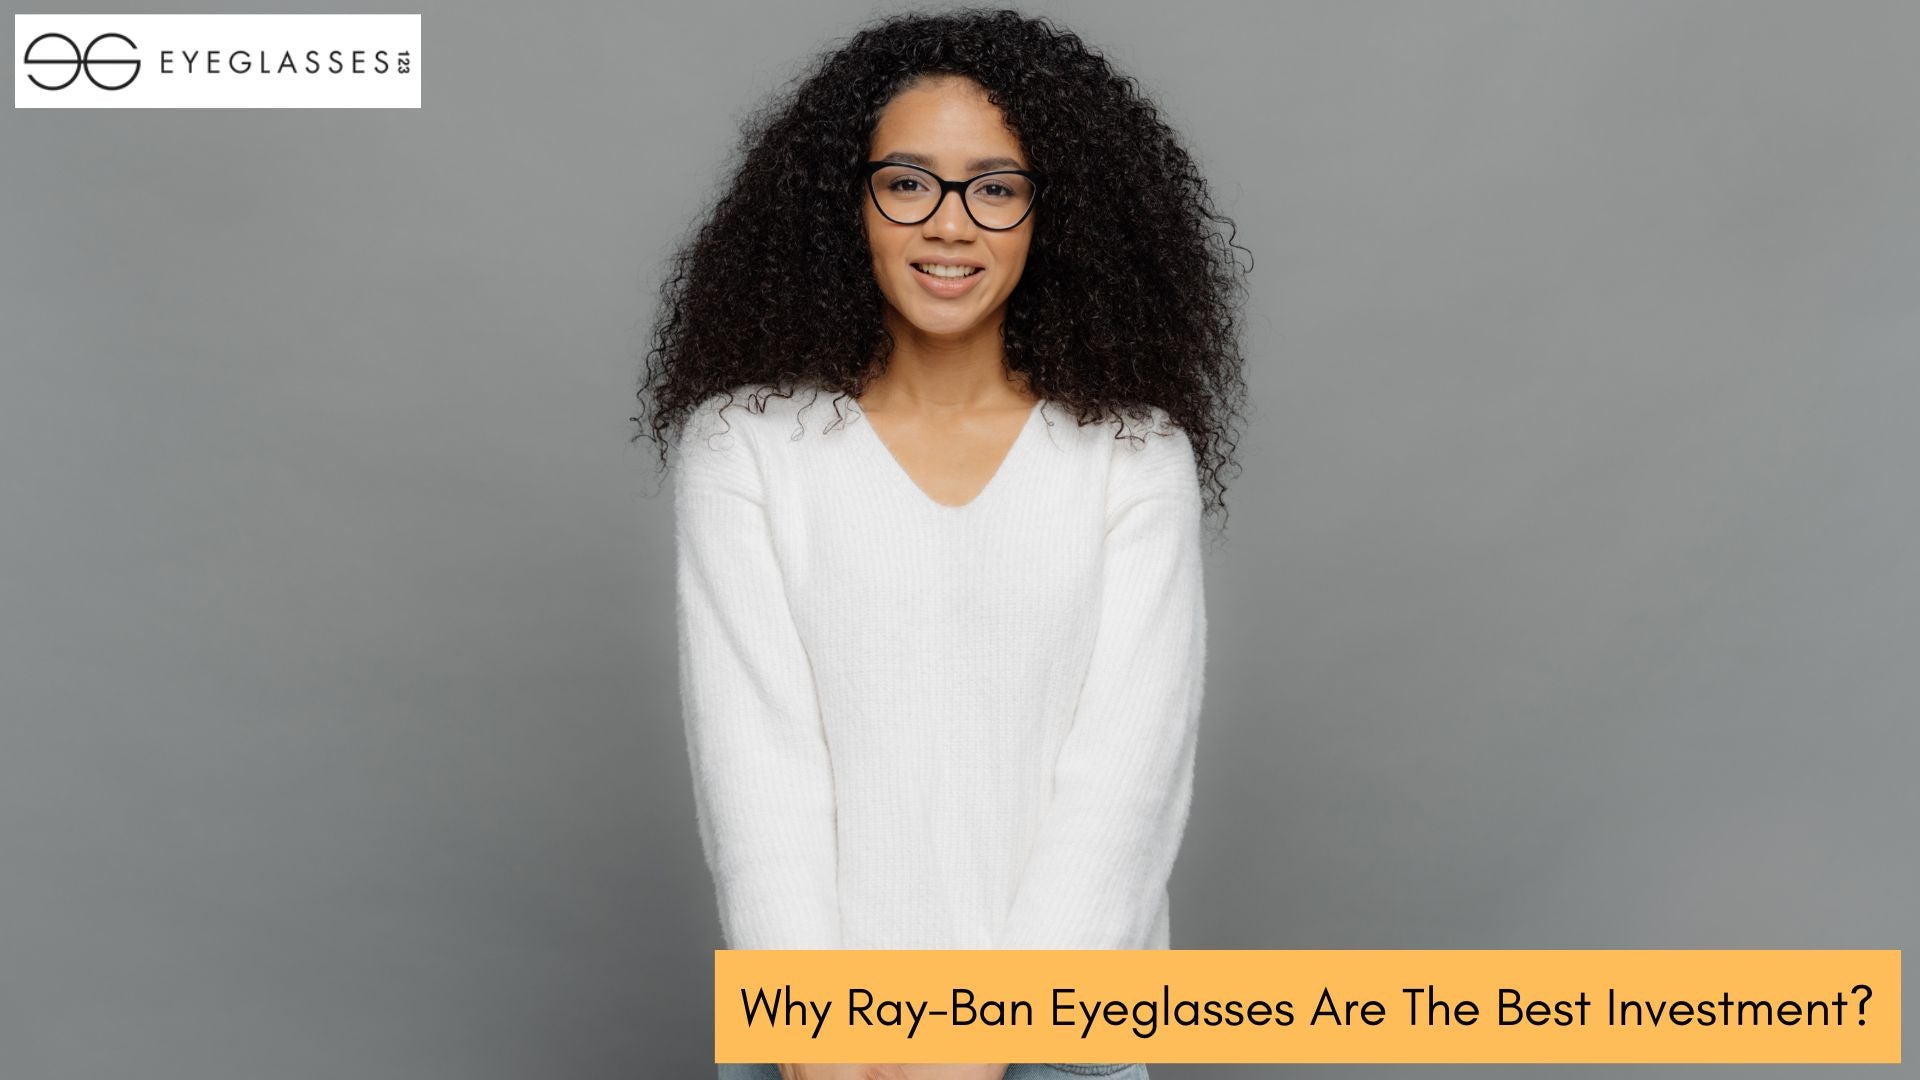 Why Ray-Ban Eyeglasses Are The Best Investment?